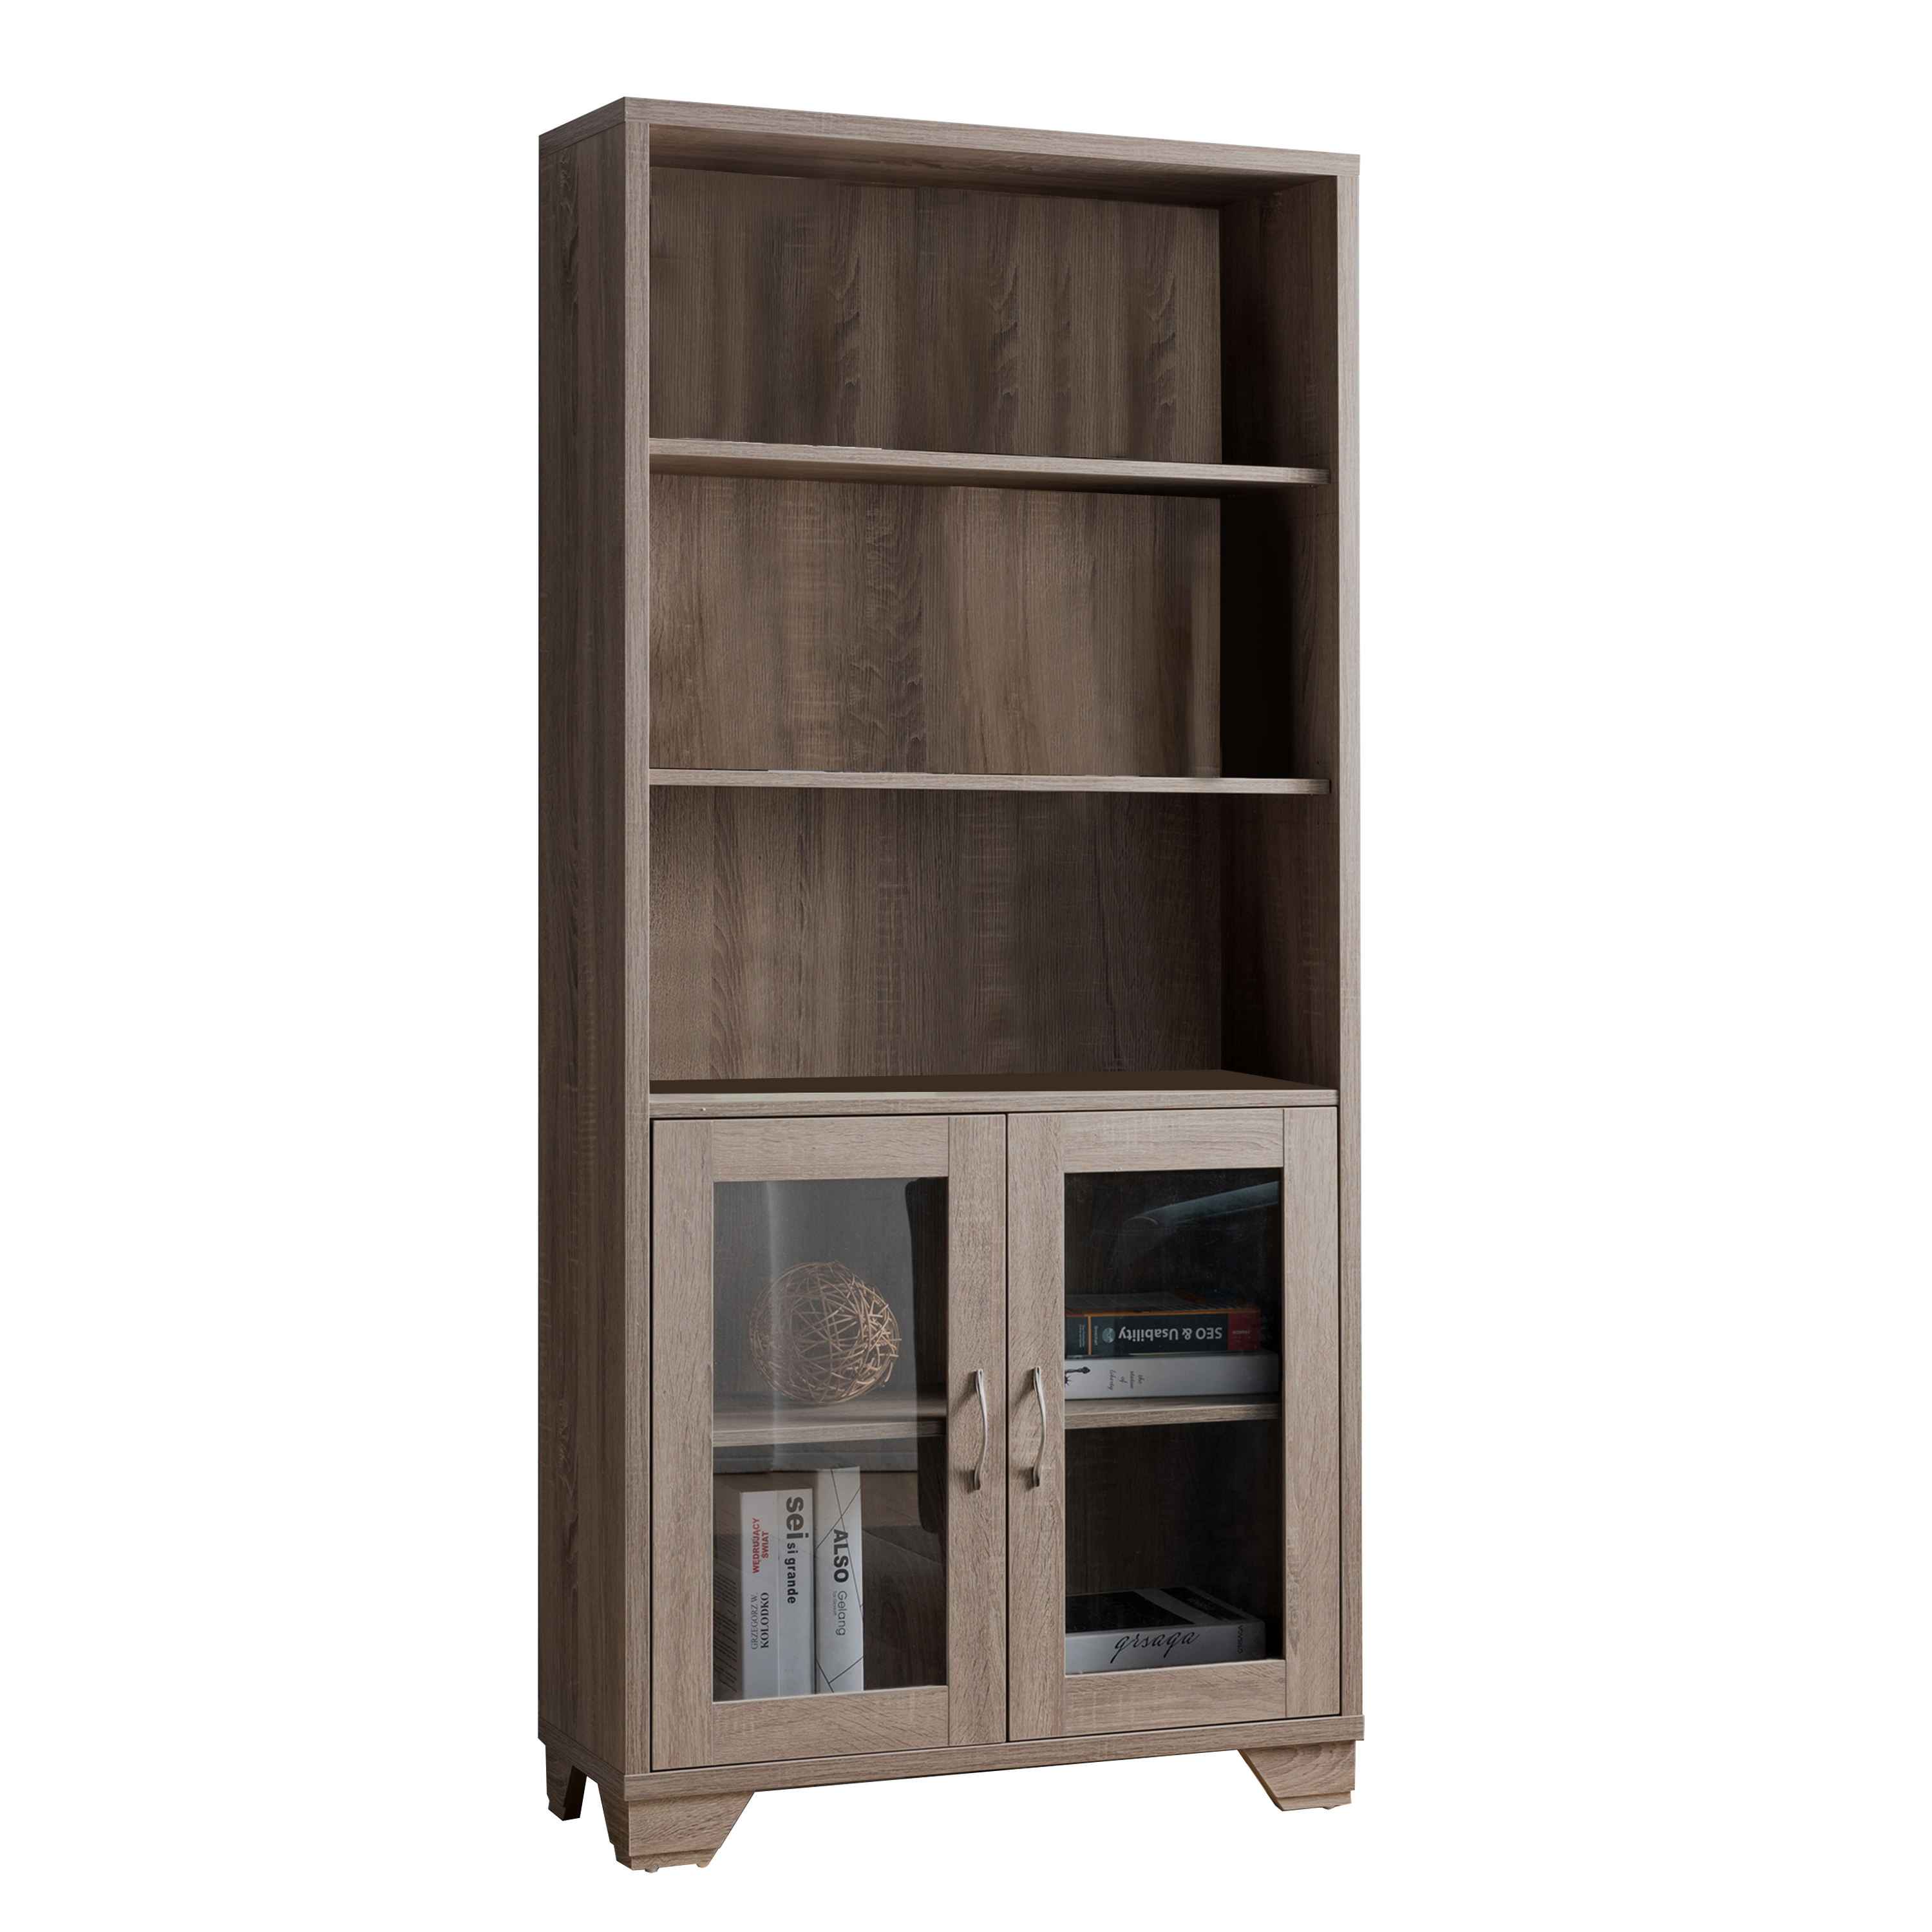 Wooden Book Cabinet With Three Display Shelves And Two Glass Doors, Taupe Brown- Saltoro Sherpi